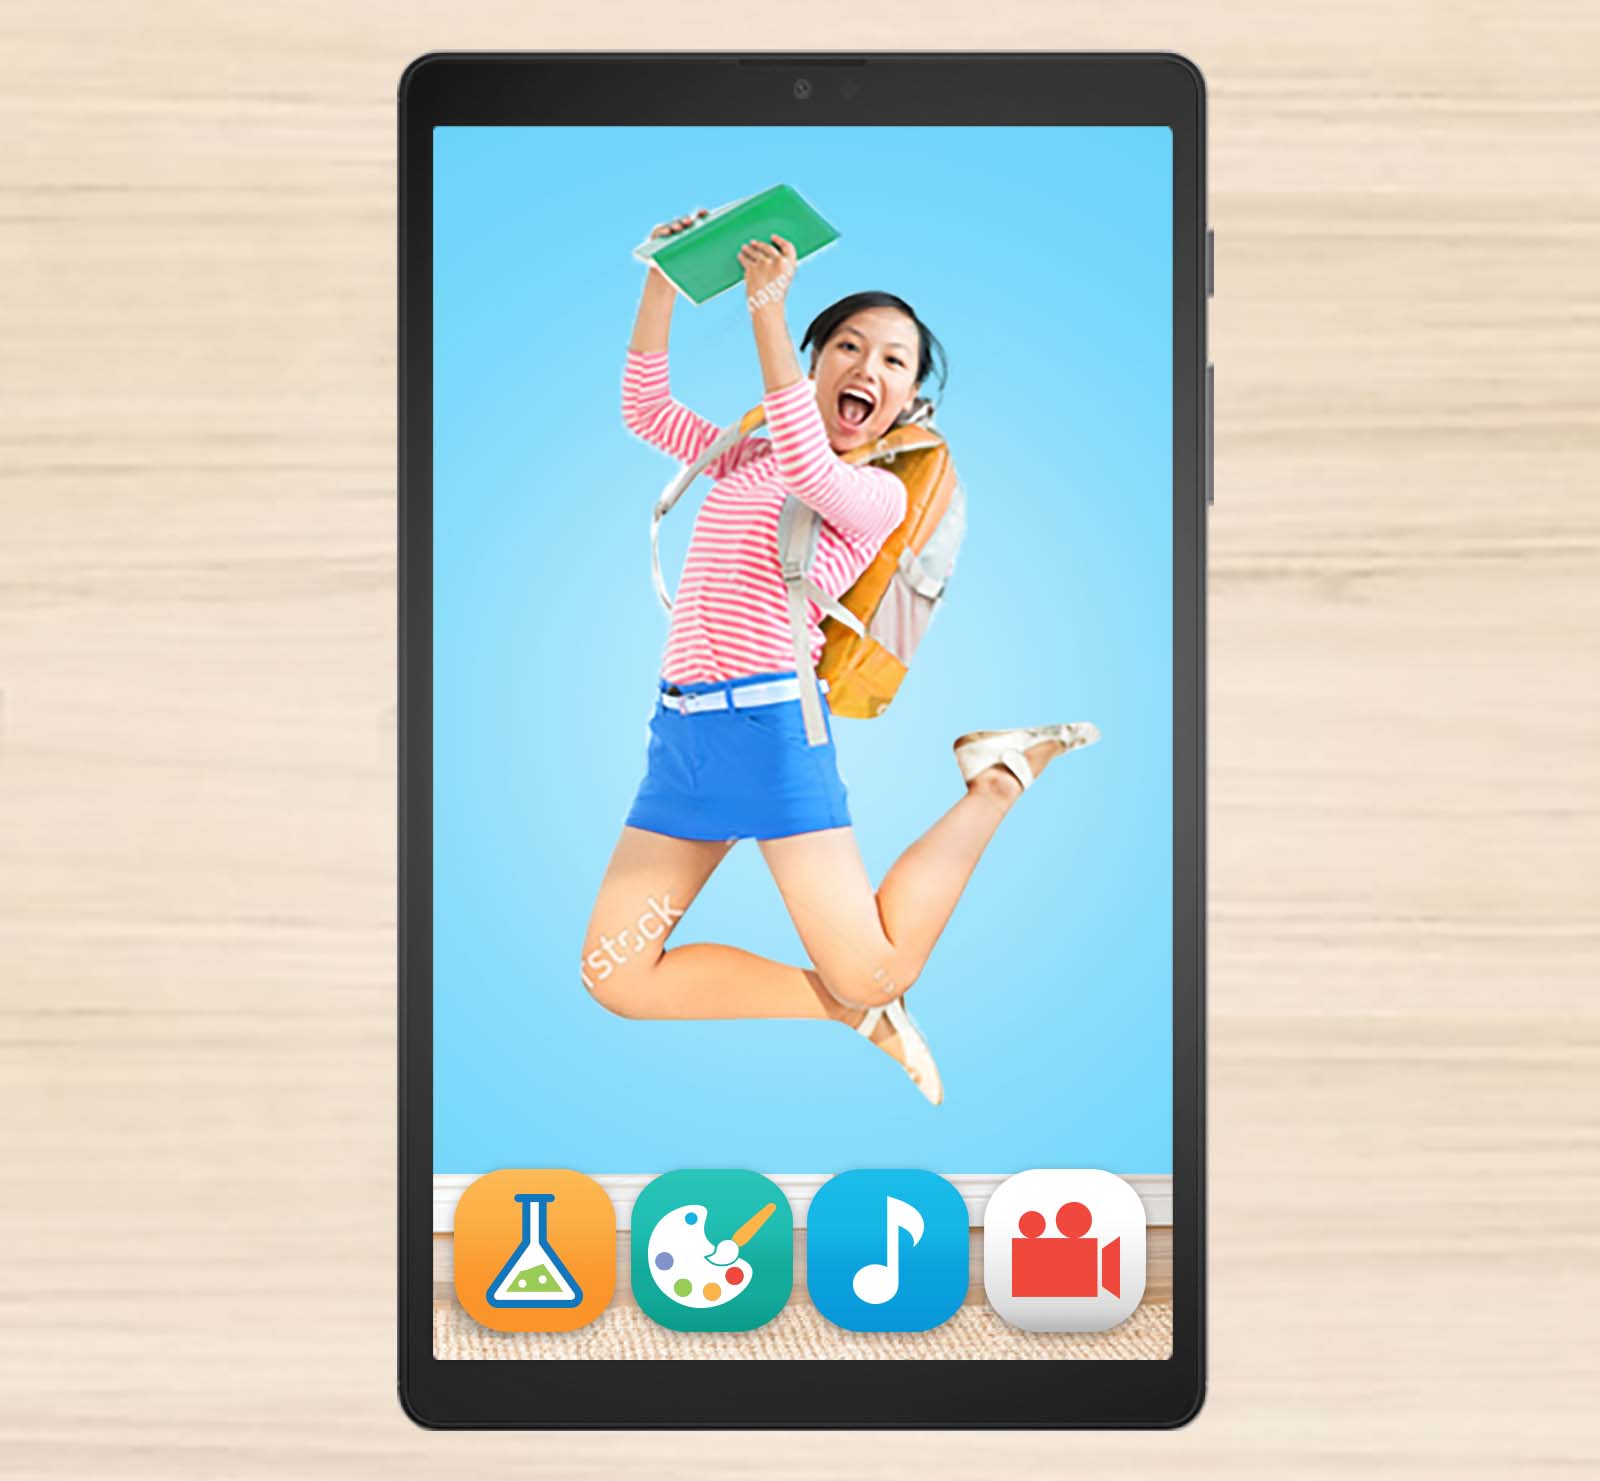 Maximize learning or playtime with the new Samsung Galaxy Tab A7 Lite, now available nationwide!